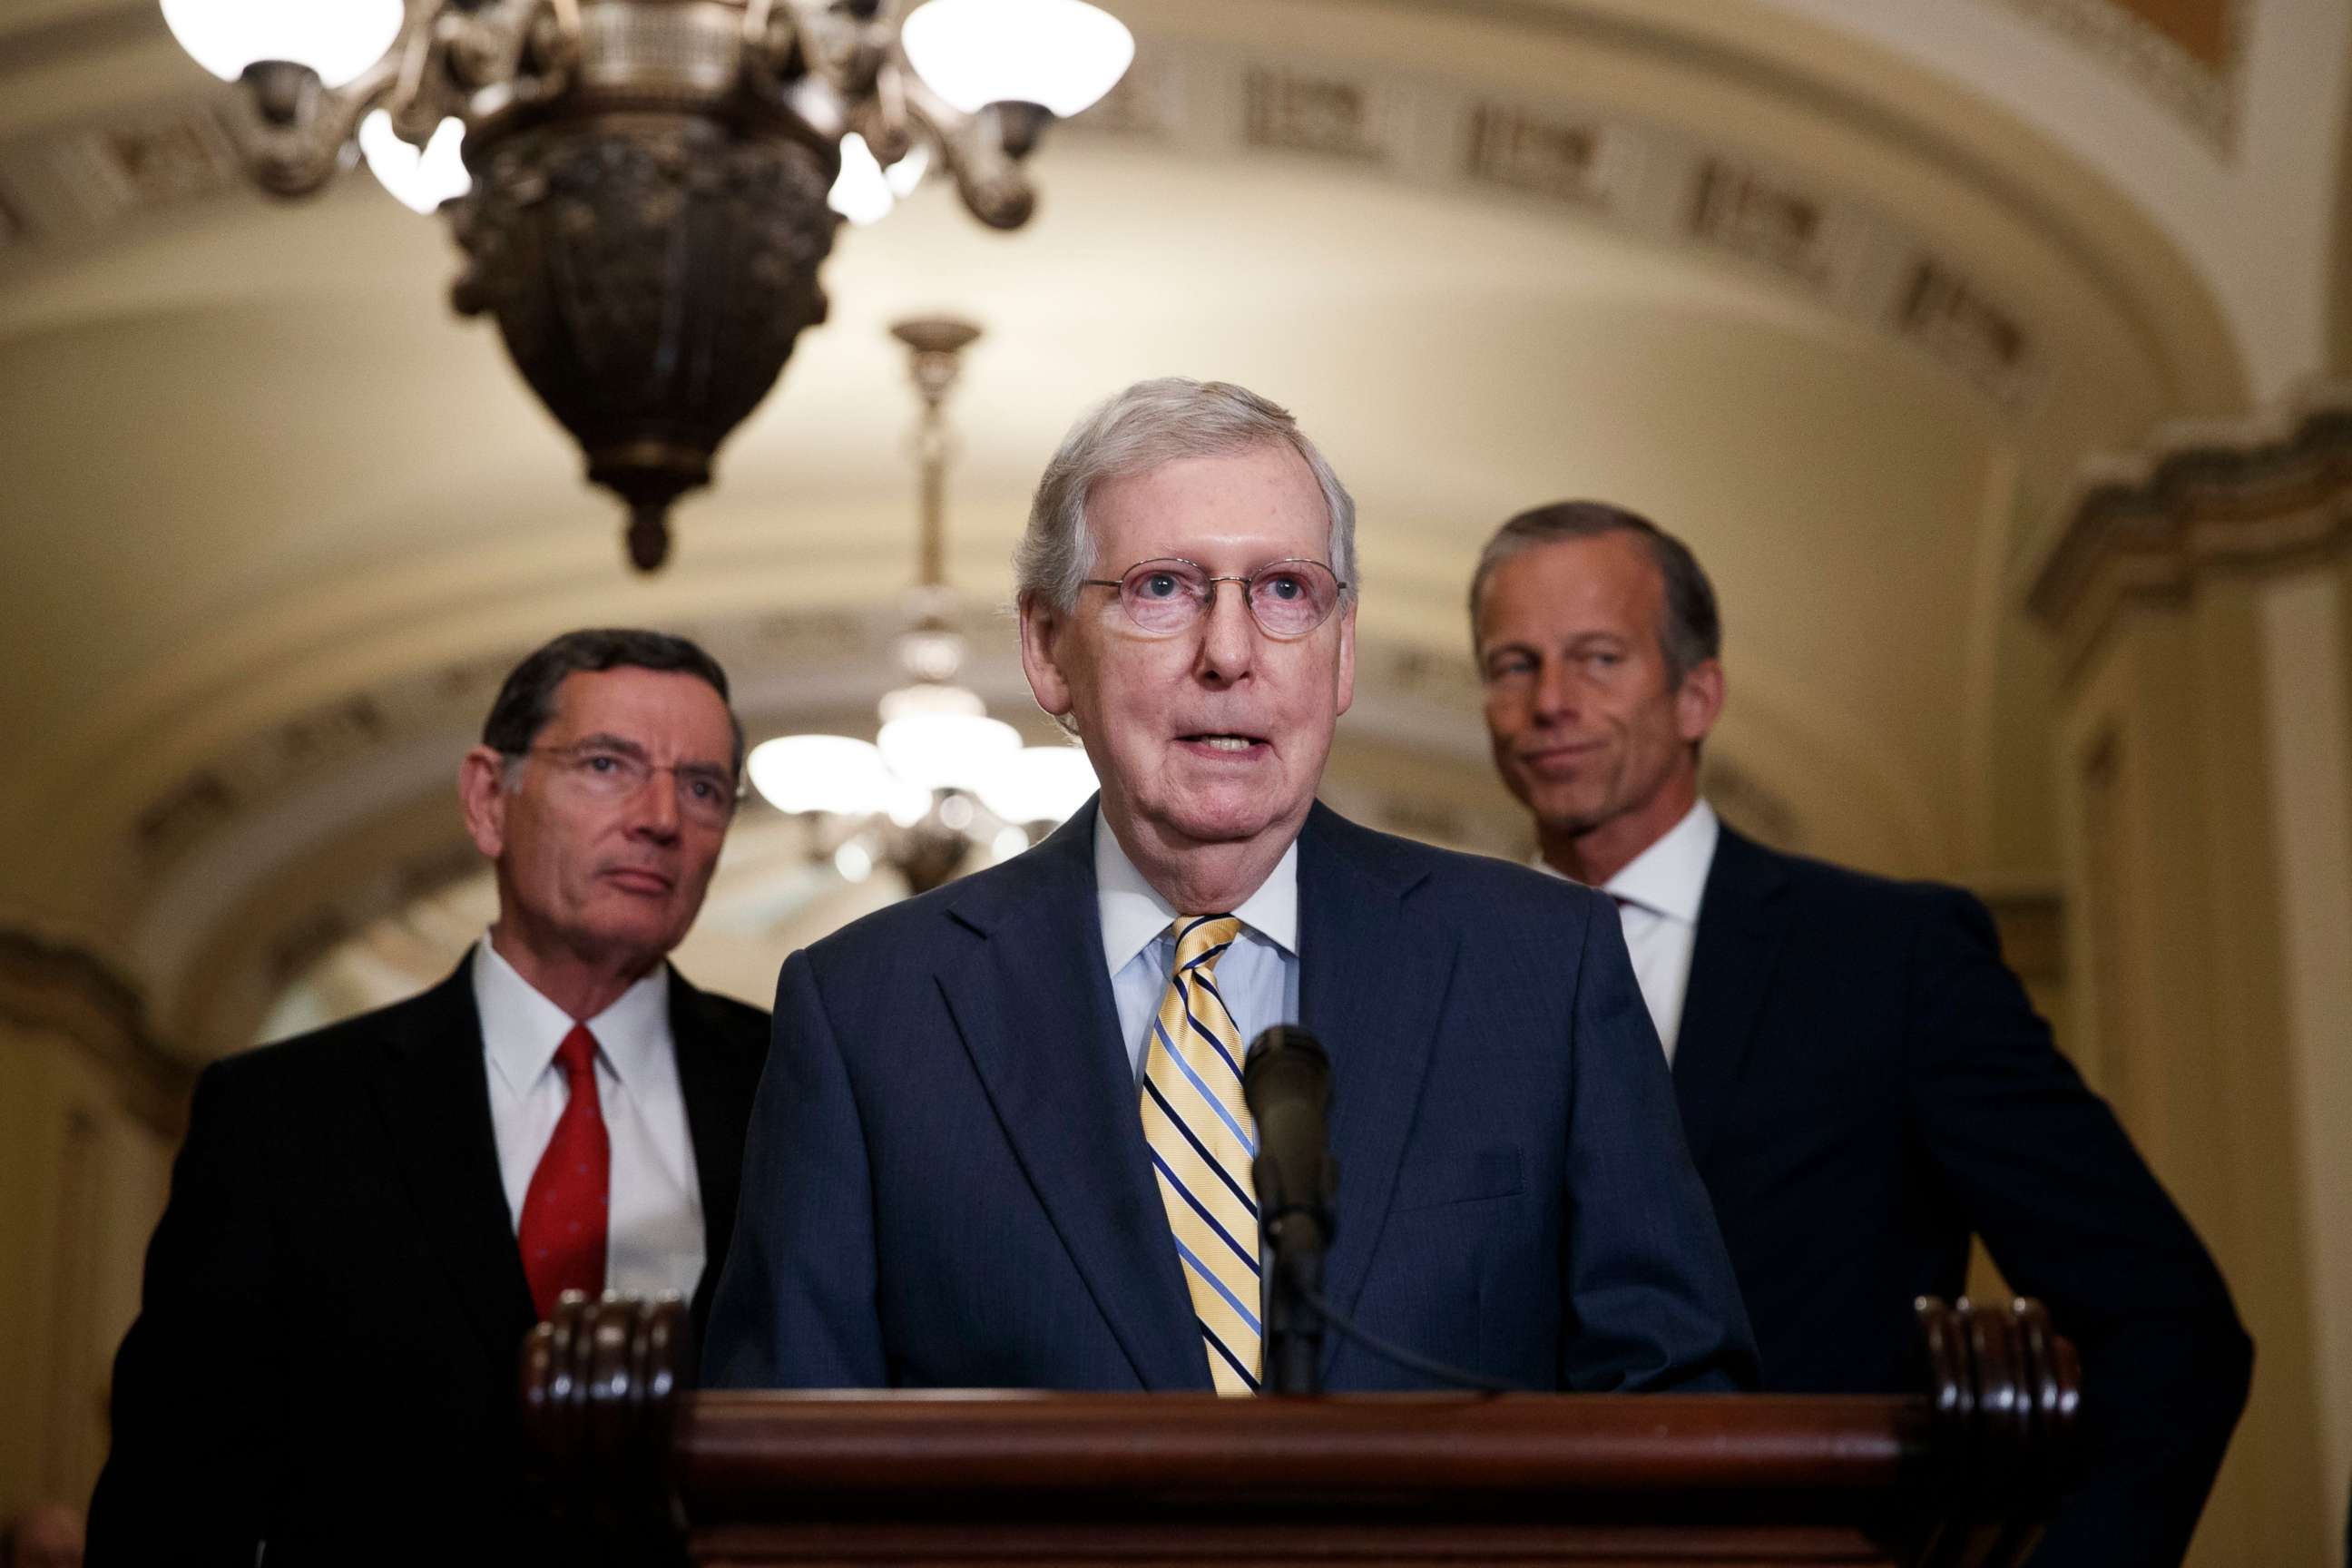 PHOTO: Senate Majority Leader Mitch McConnell responds to a question from the news media during a press conference in the Ohio Clock Corridor of the U.S. Capitol in Washington, July 9, 2019.